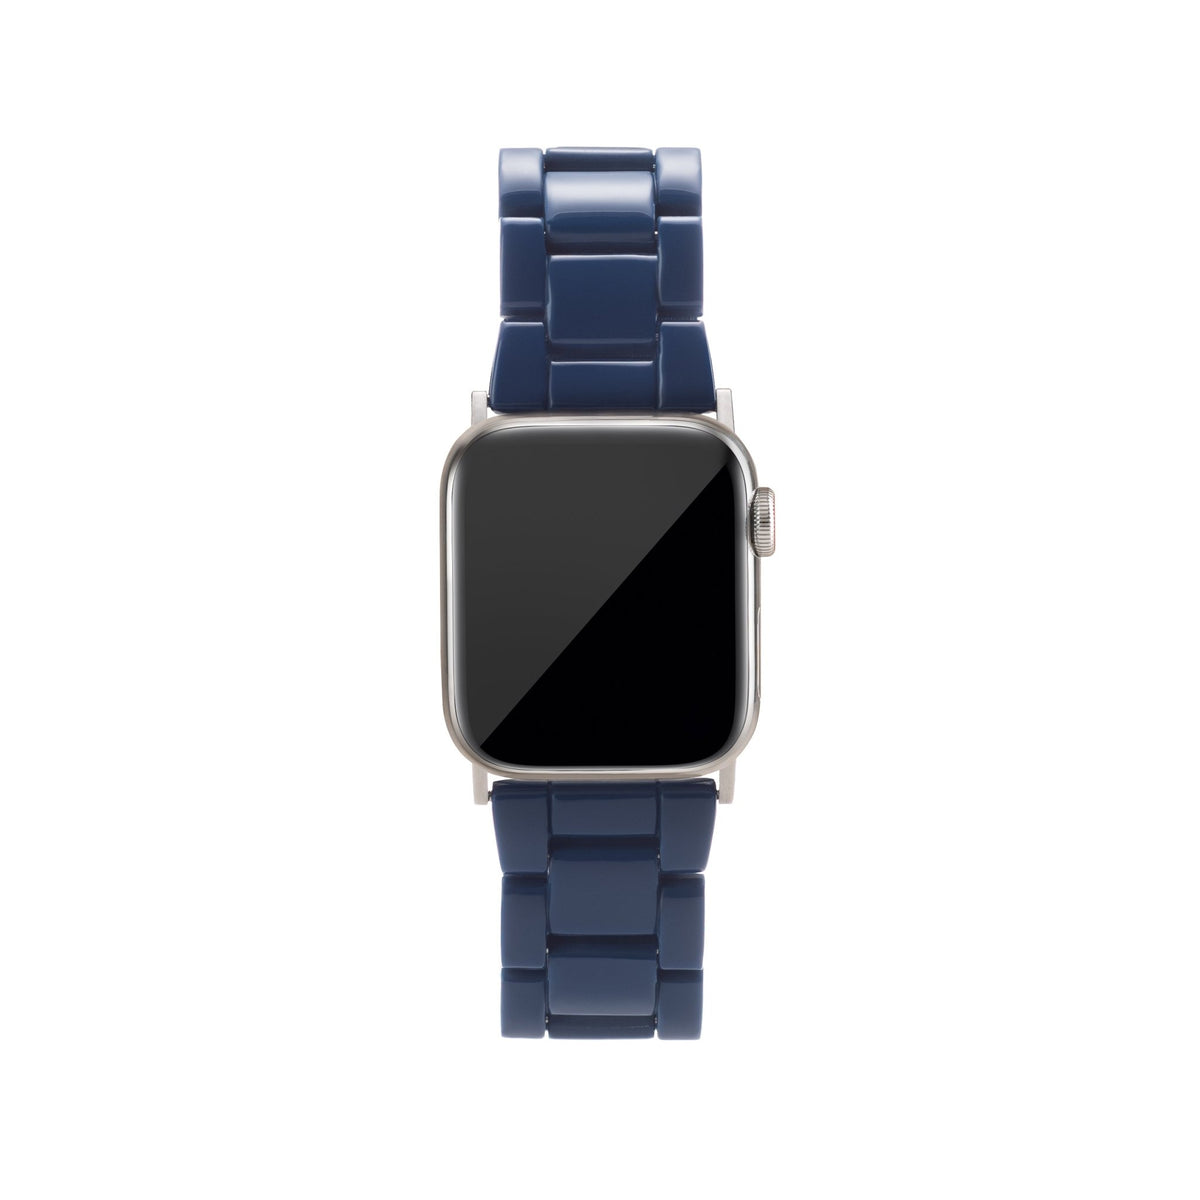 MACHETE Deluxe Apple Watch Band Set in French Navy Outlet